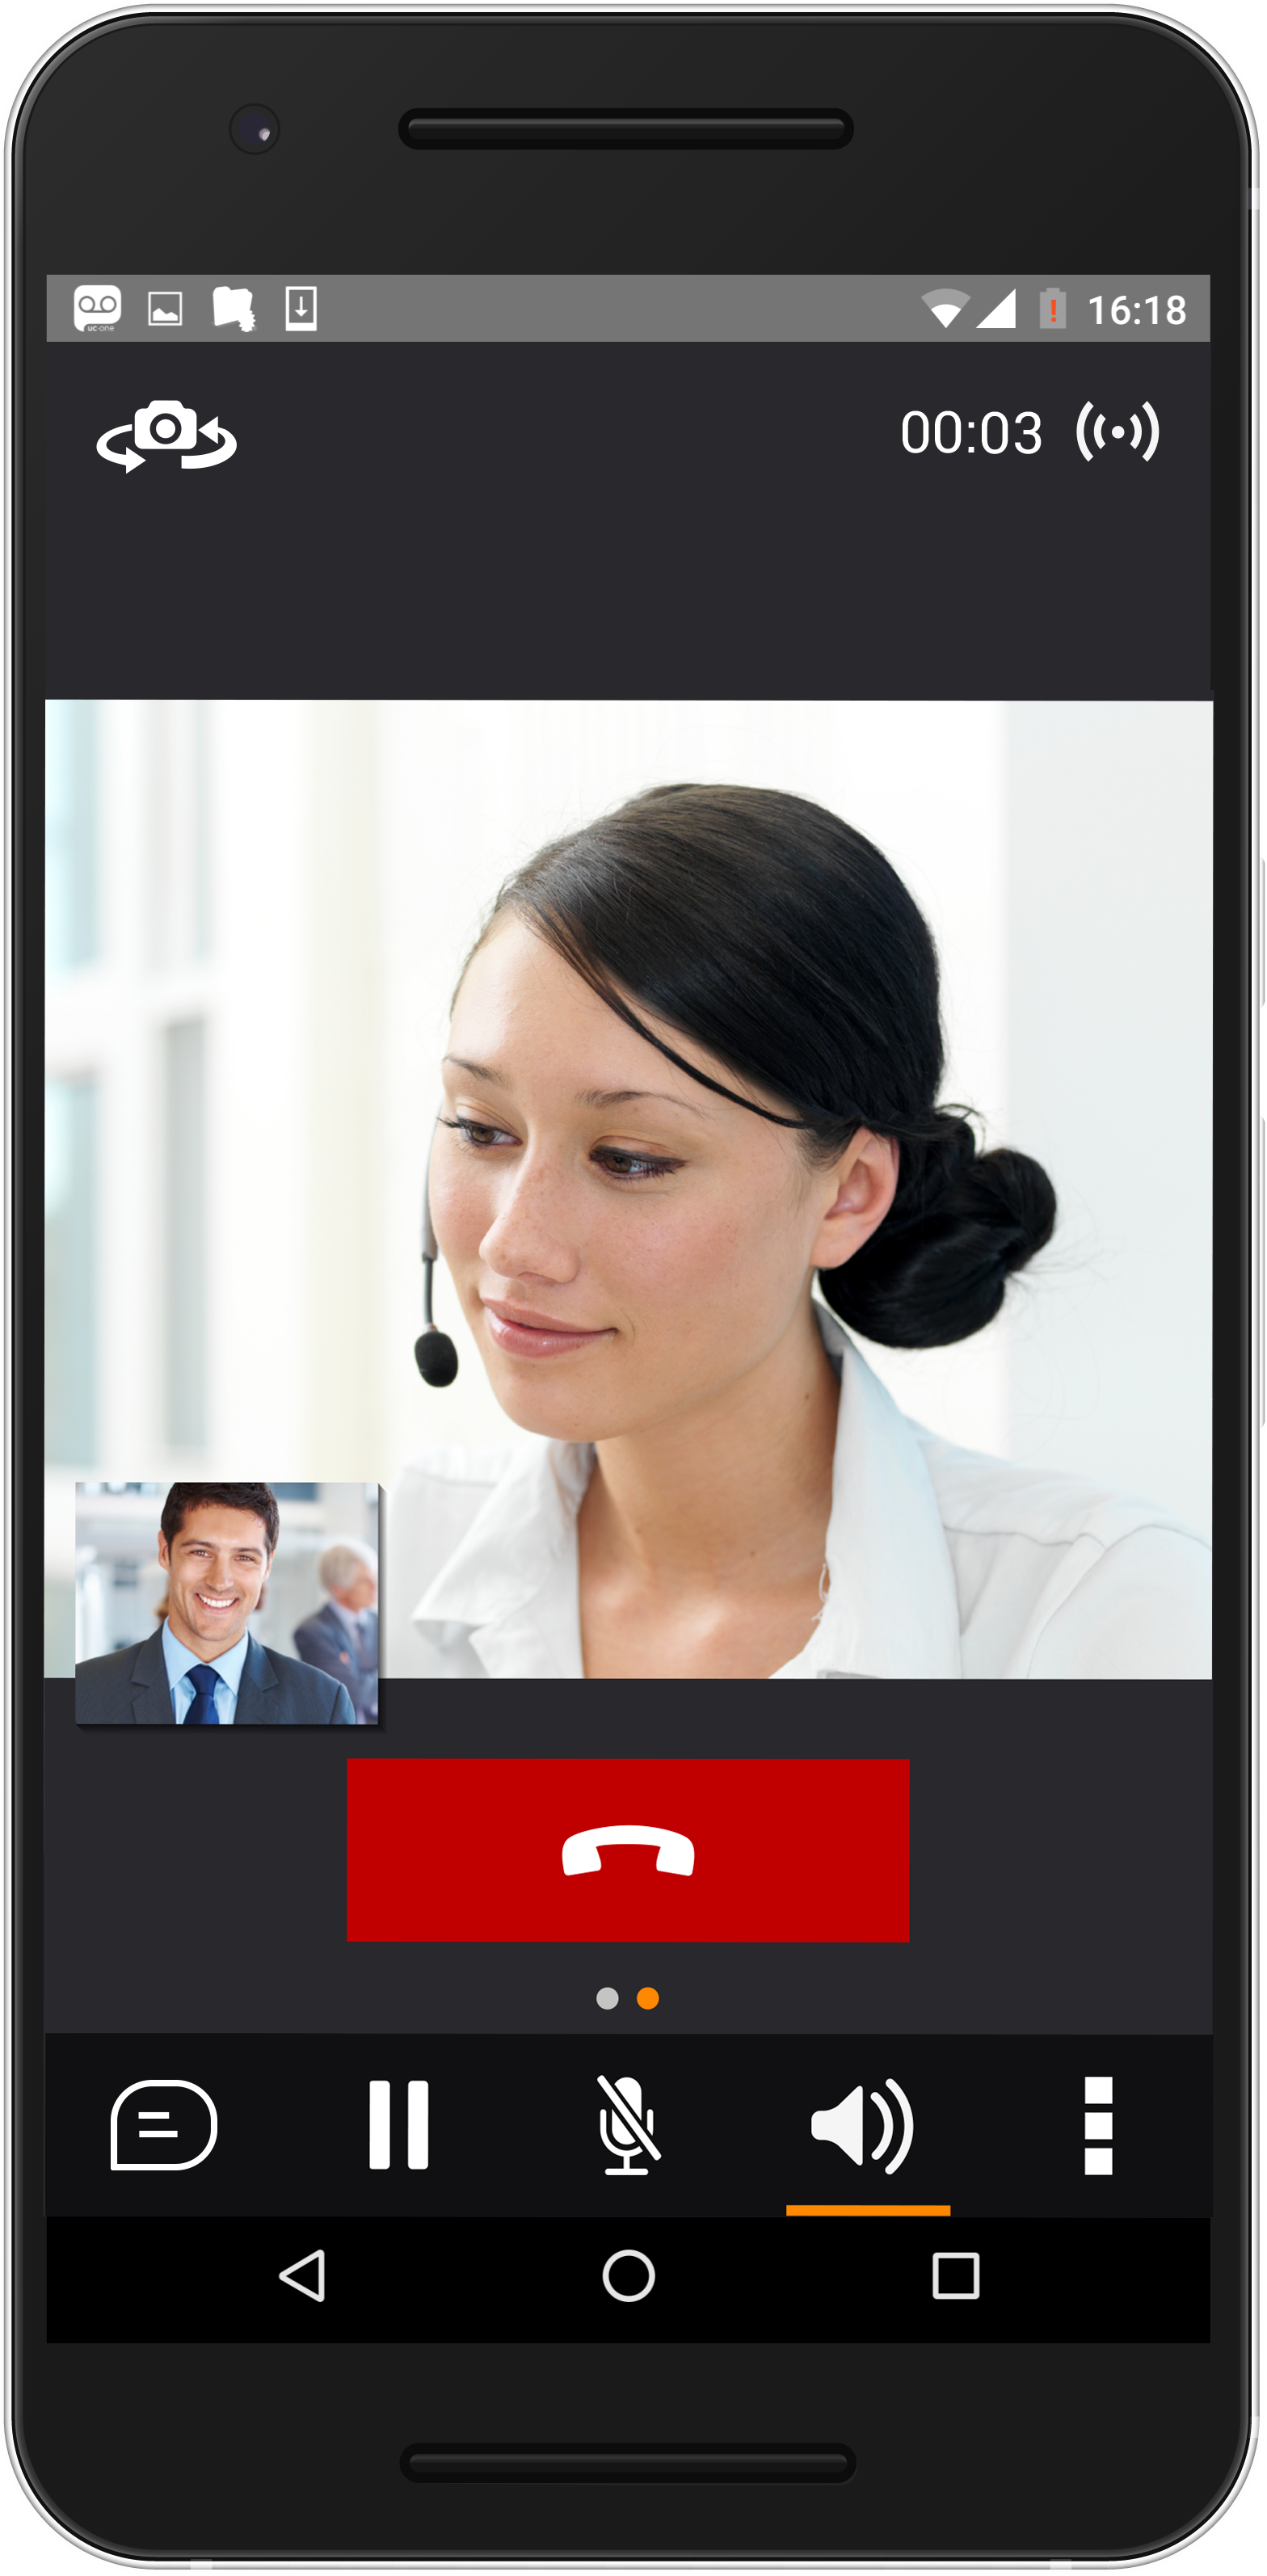 UC-One_Communicator_Android_v22.0.1-_VIDEO_Call.png